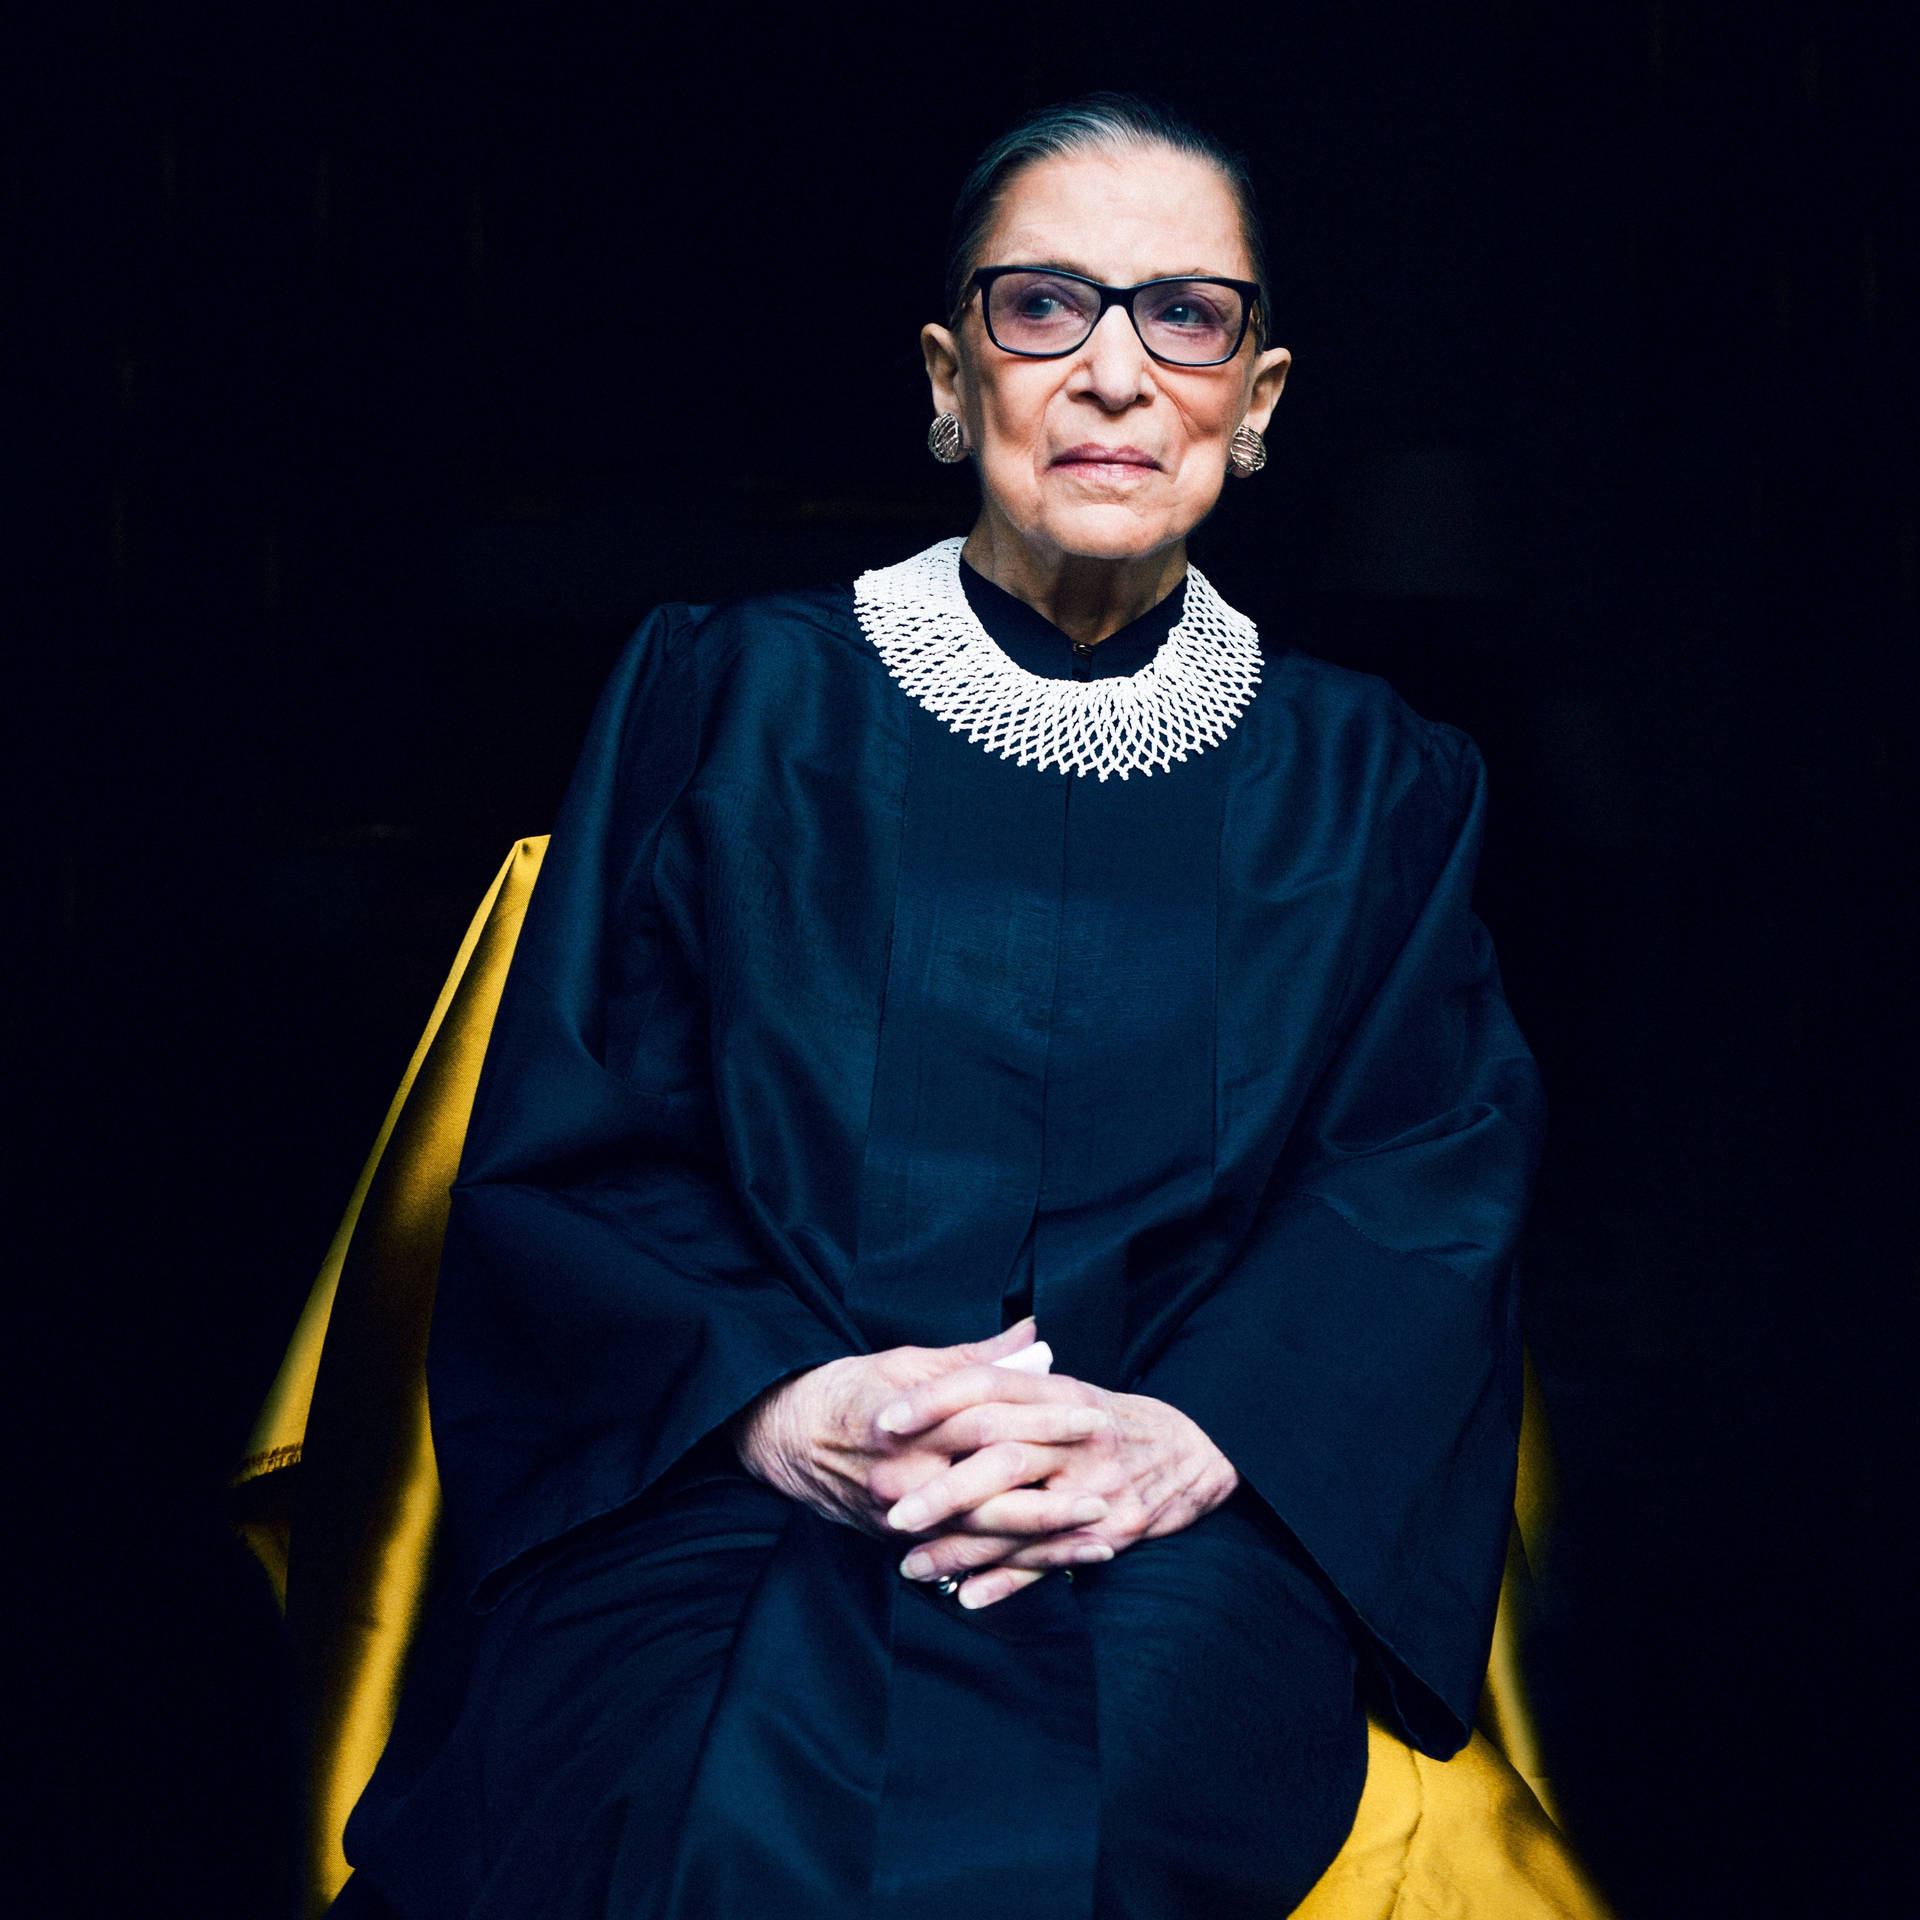 Ruth Bader Ginsburg Monochromatic Black Gown Background